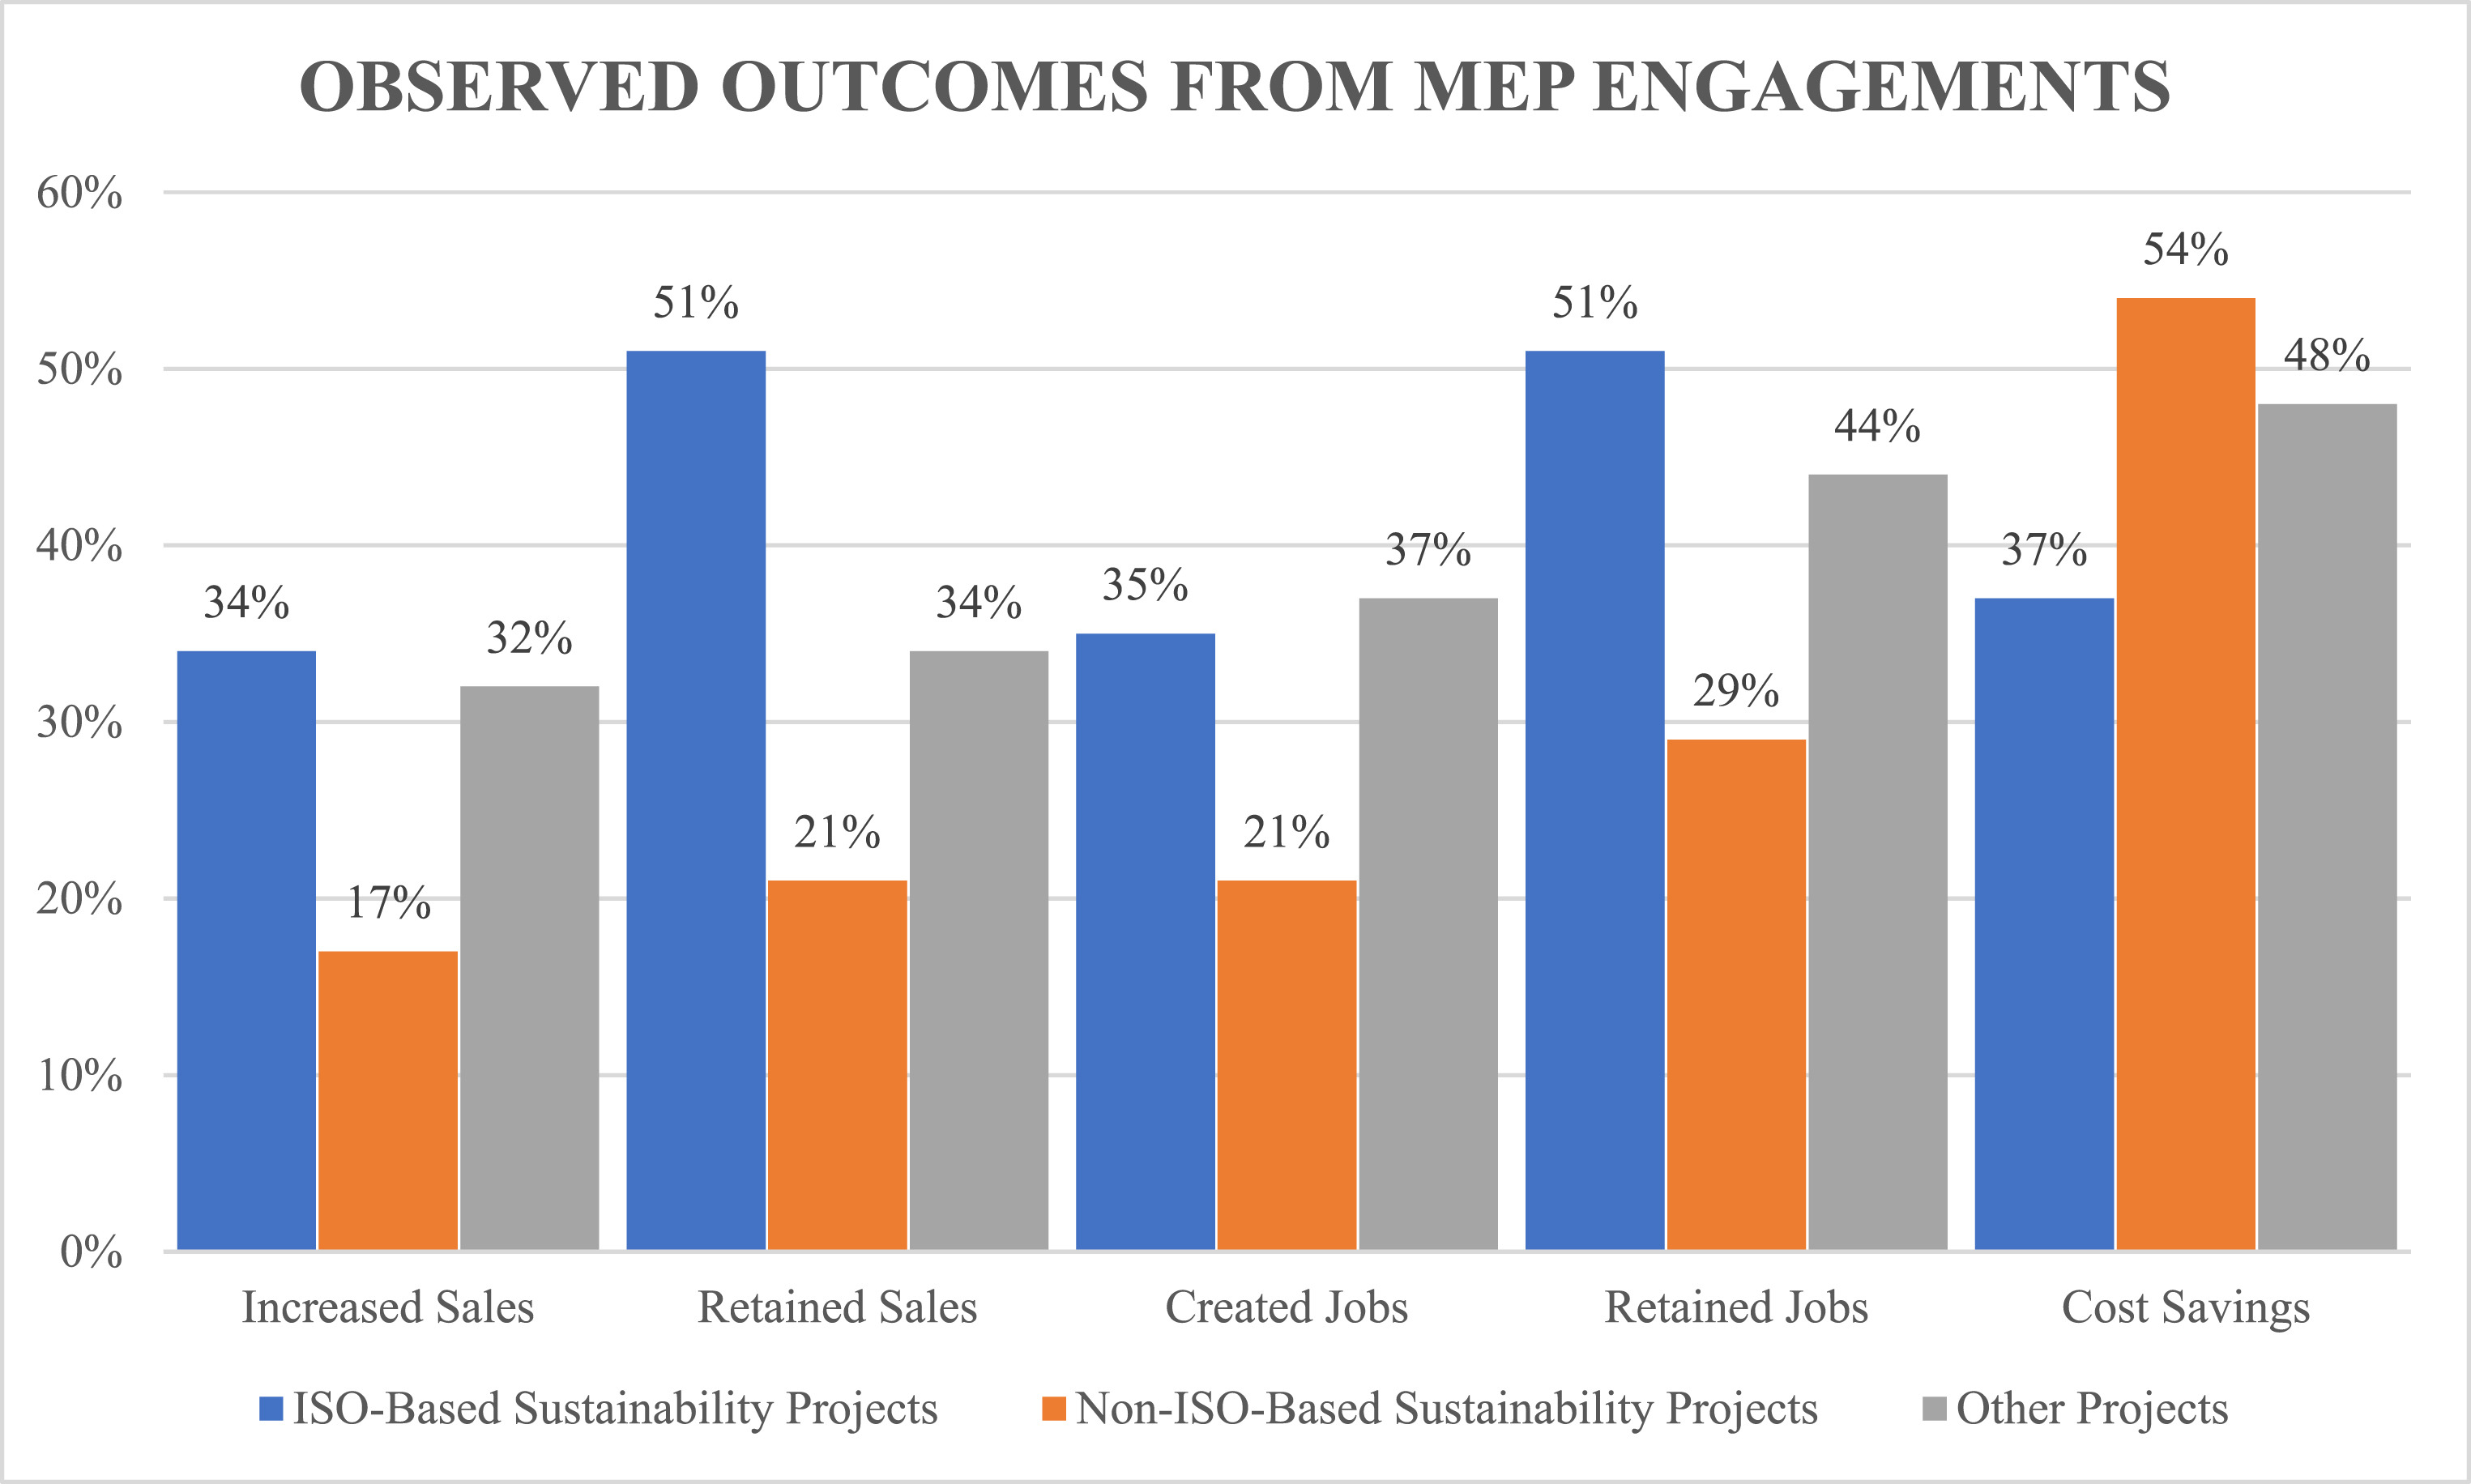 Observed outcomes from MEP engagements